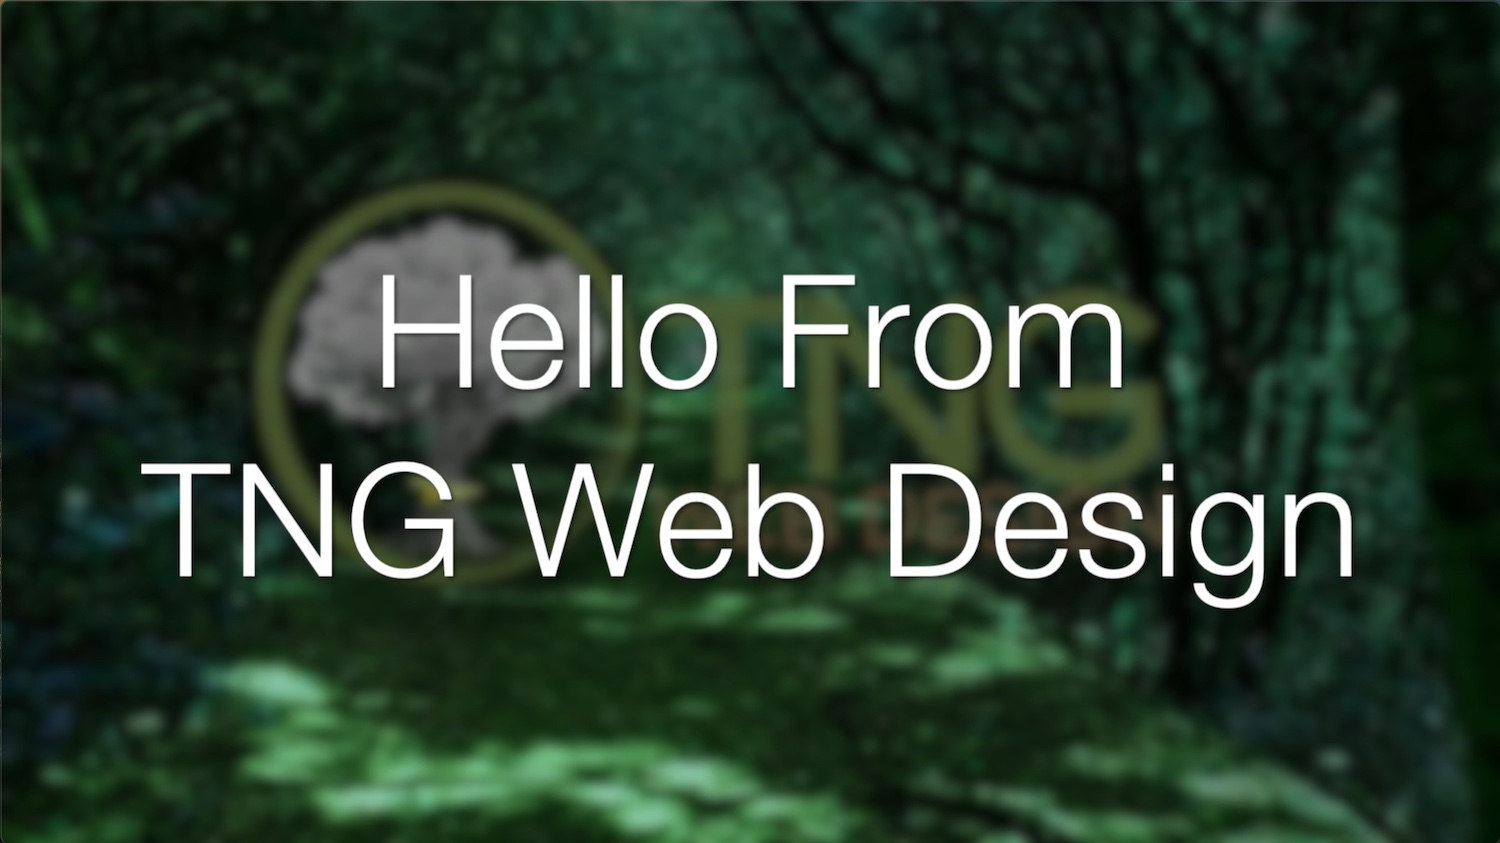 Featured image for “Hello From TNG Web Design”